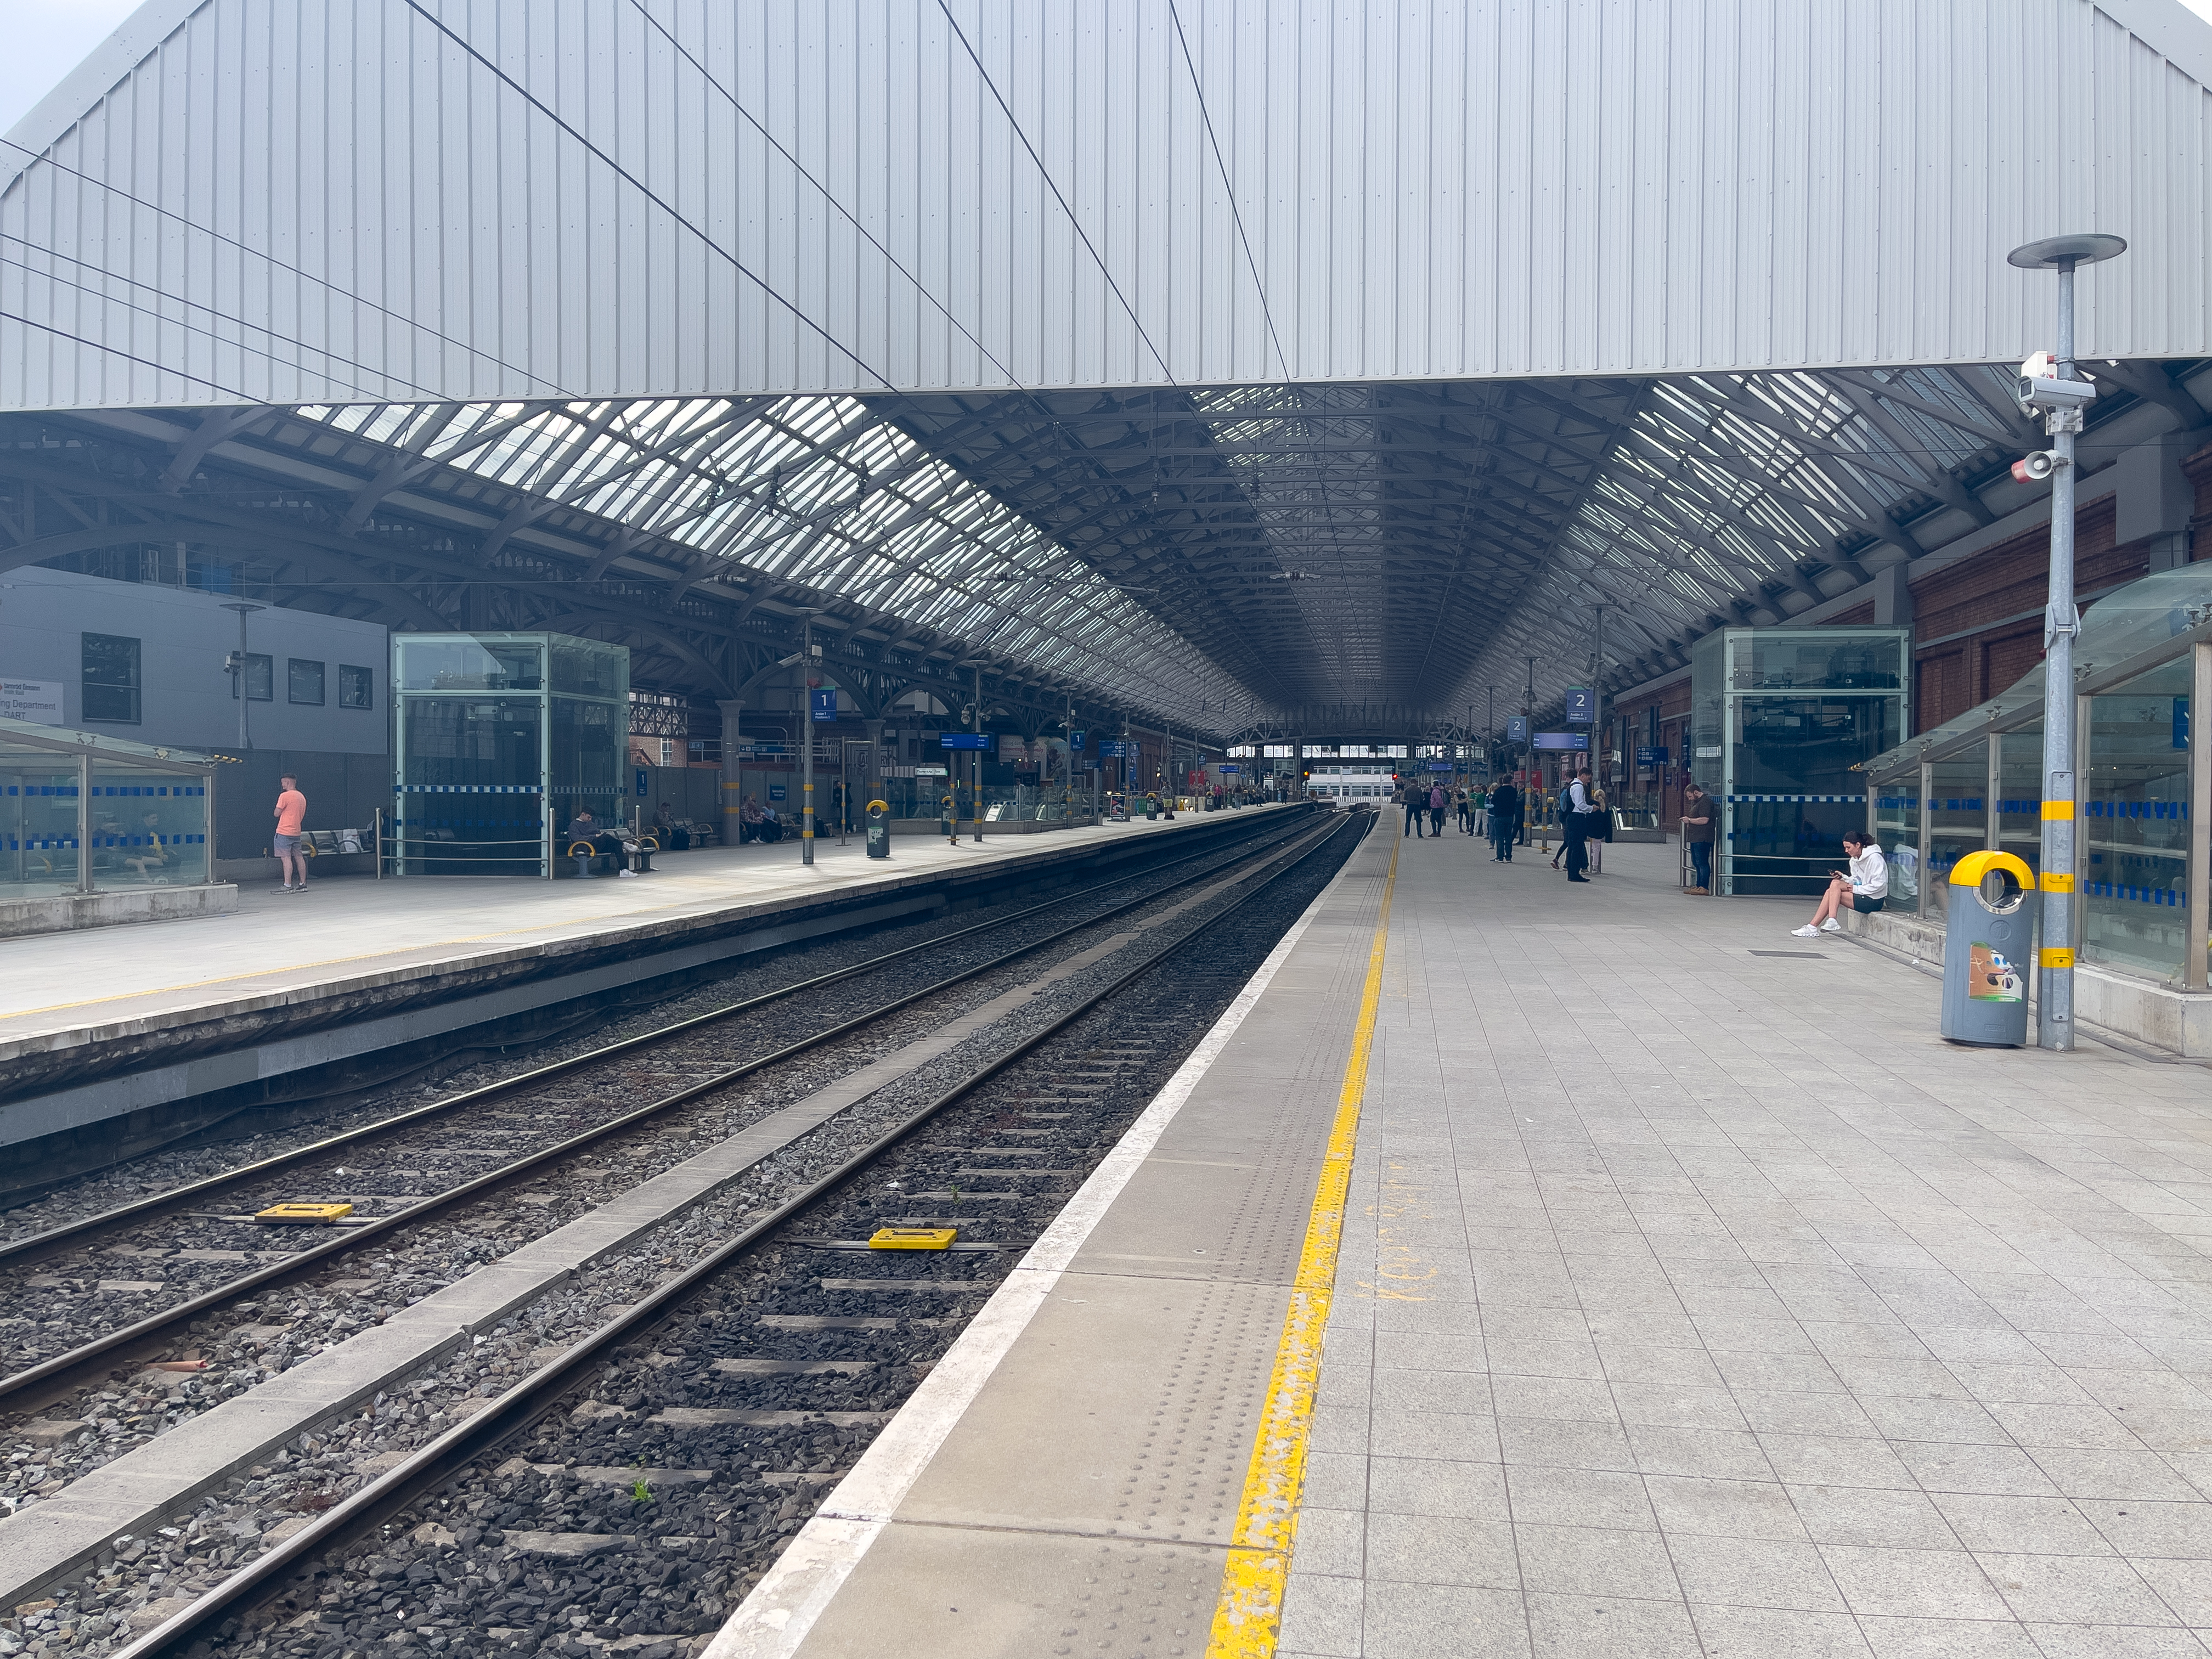 VIDEO: PEARSE STATION